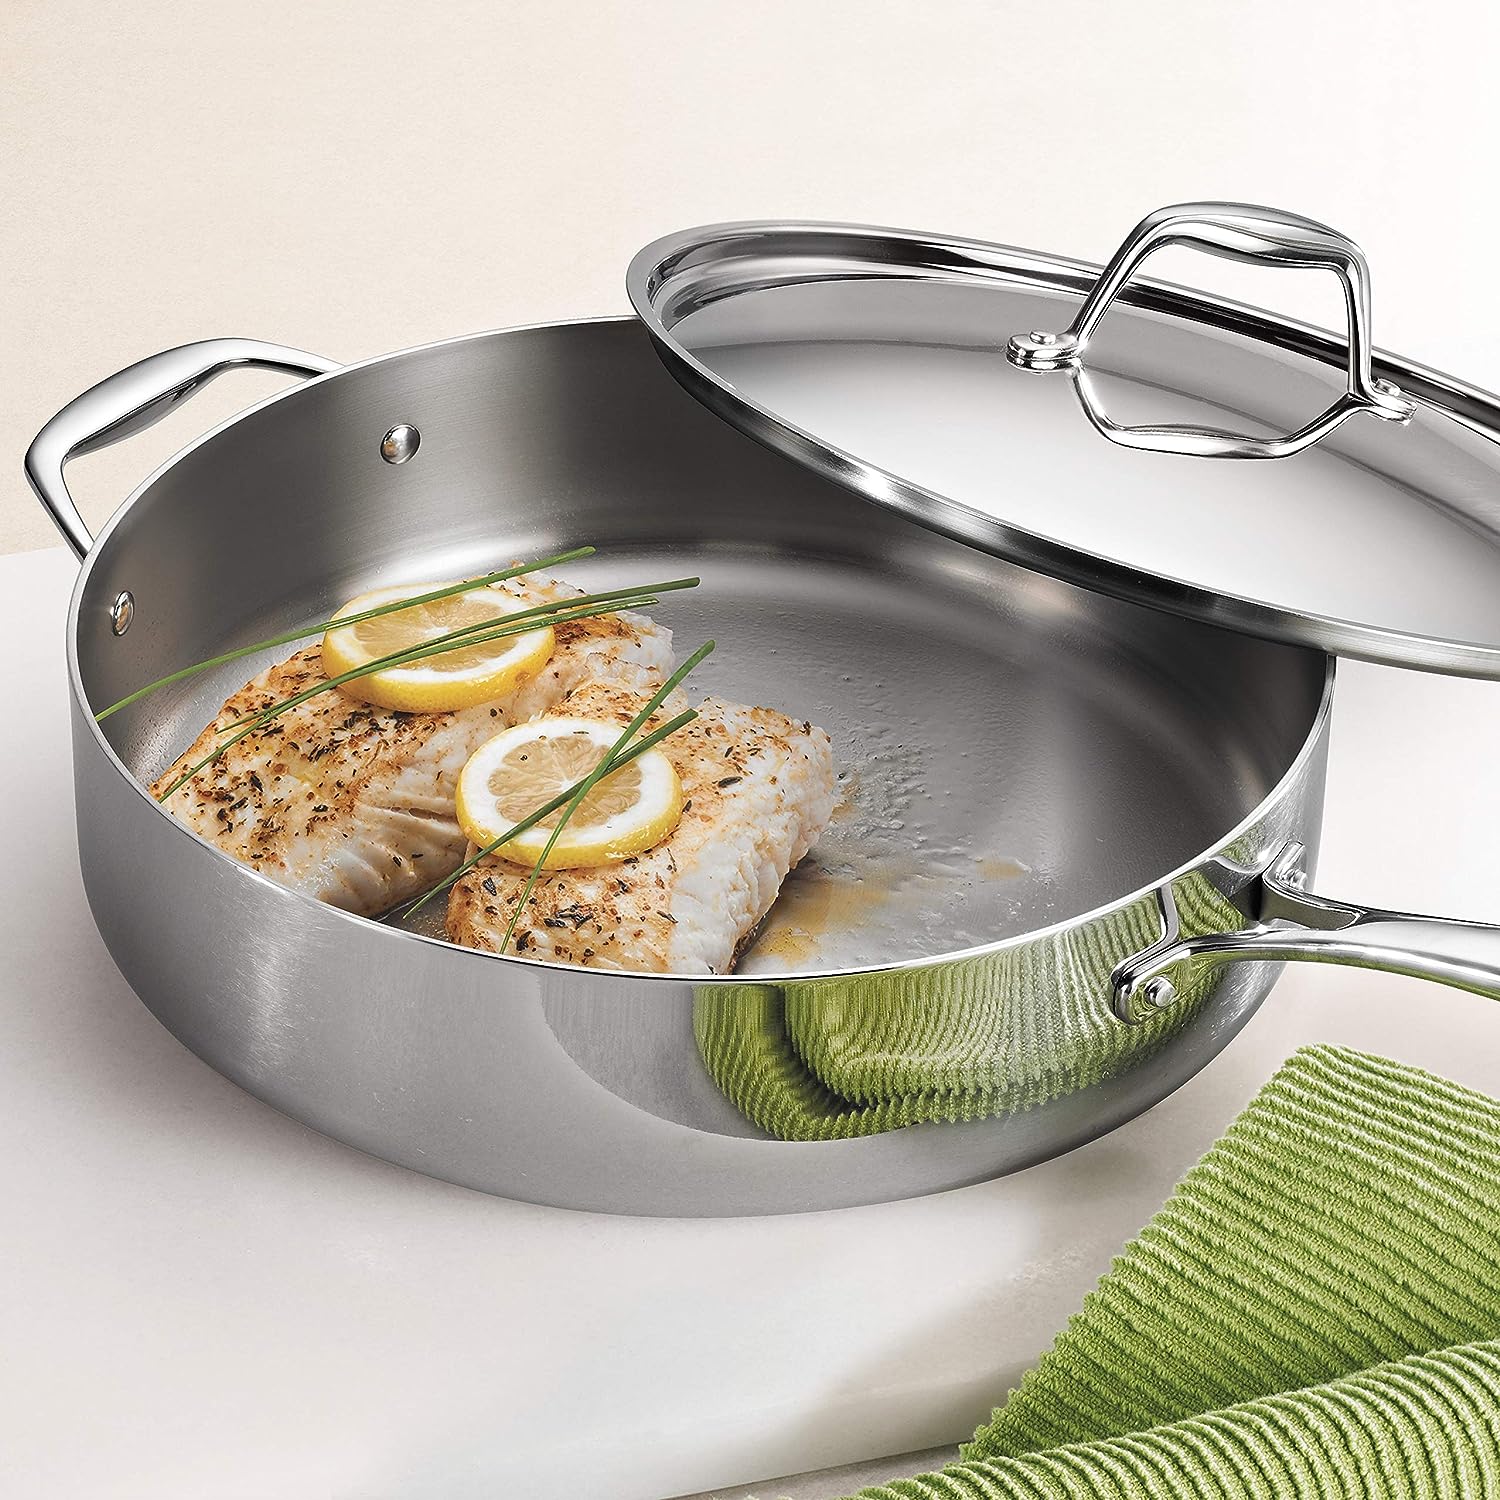  Tramontina Cookware Set Tri-Ply Clad Stainless Steel